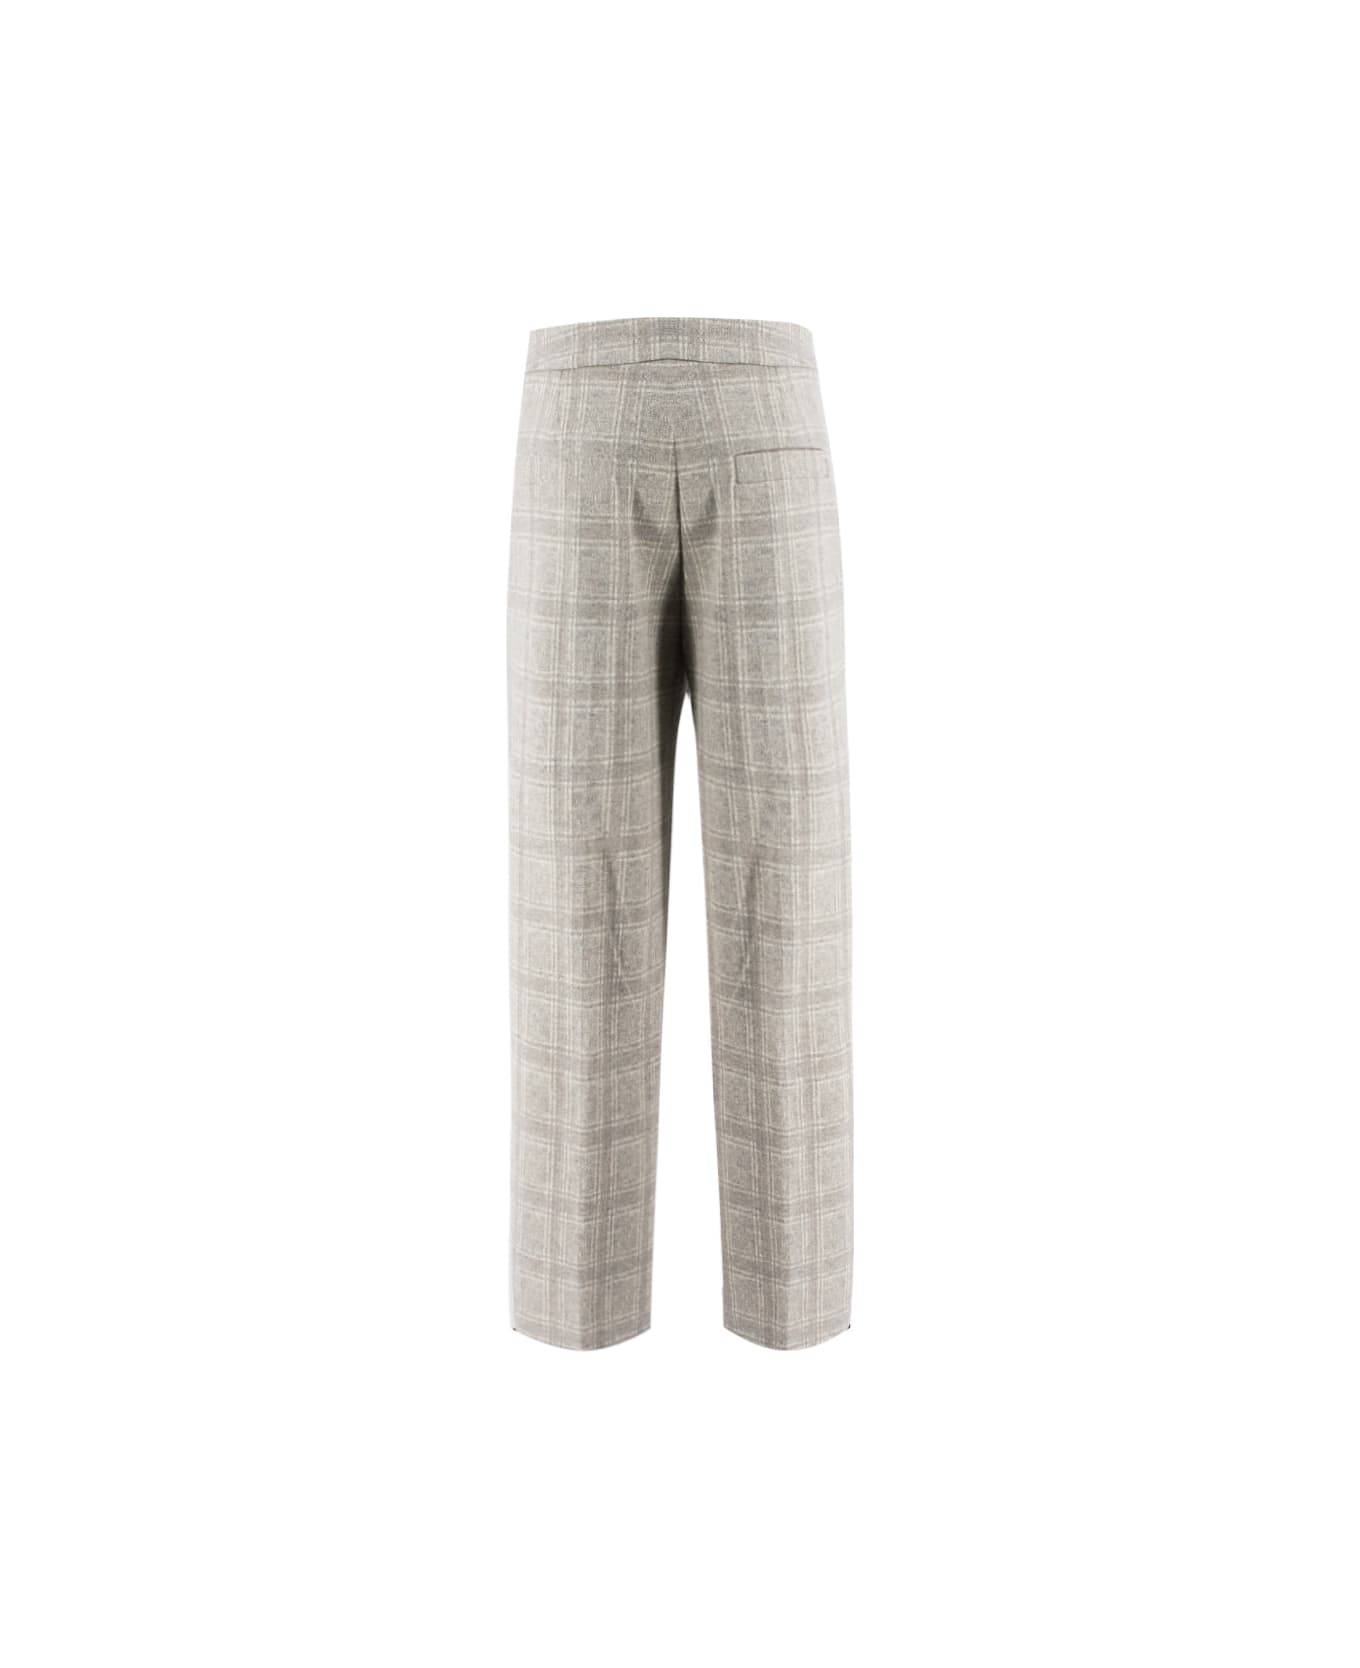 Le Tricot Perugia Trousers - GREY/BEIGE